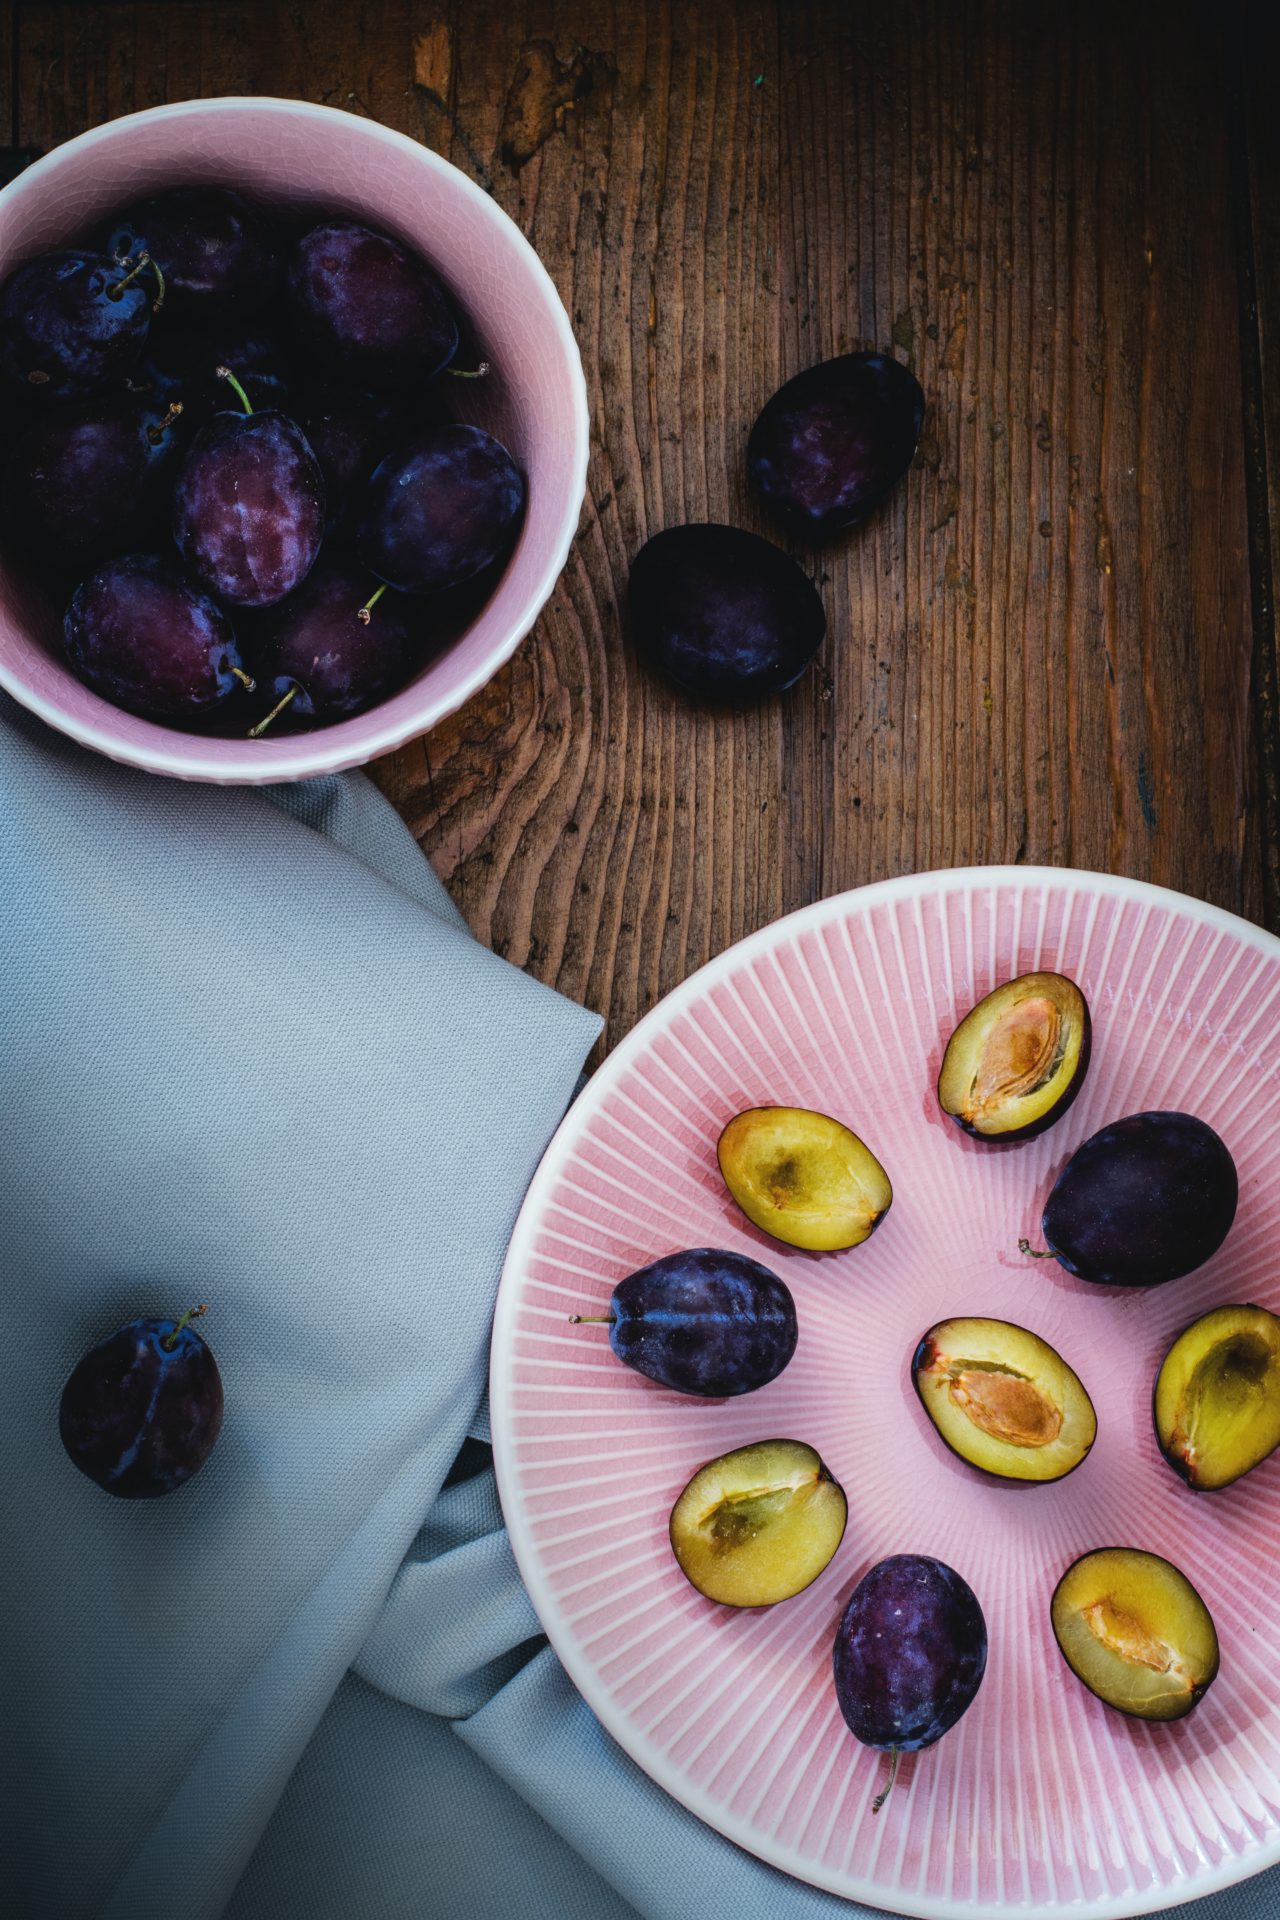 prune plums on a plate